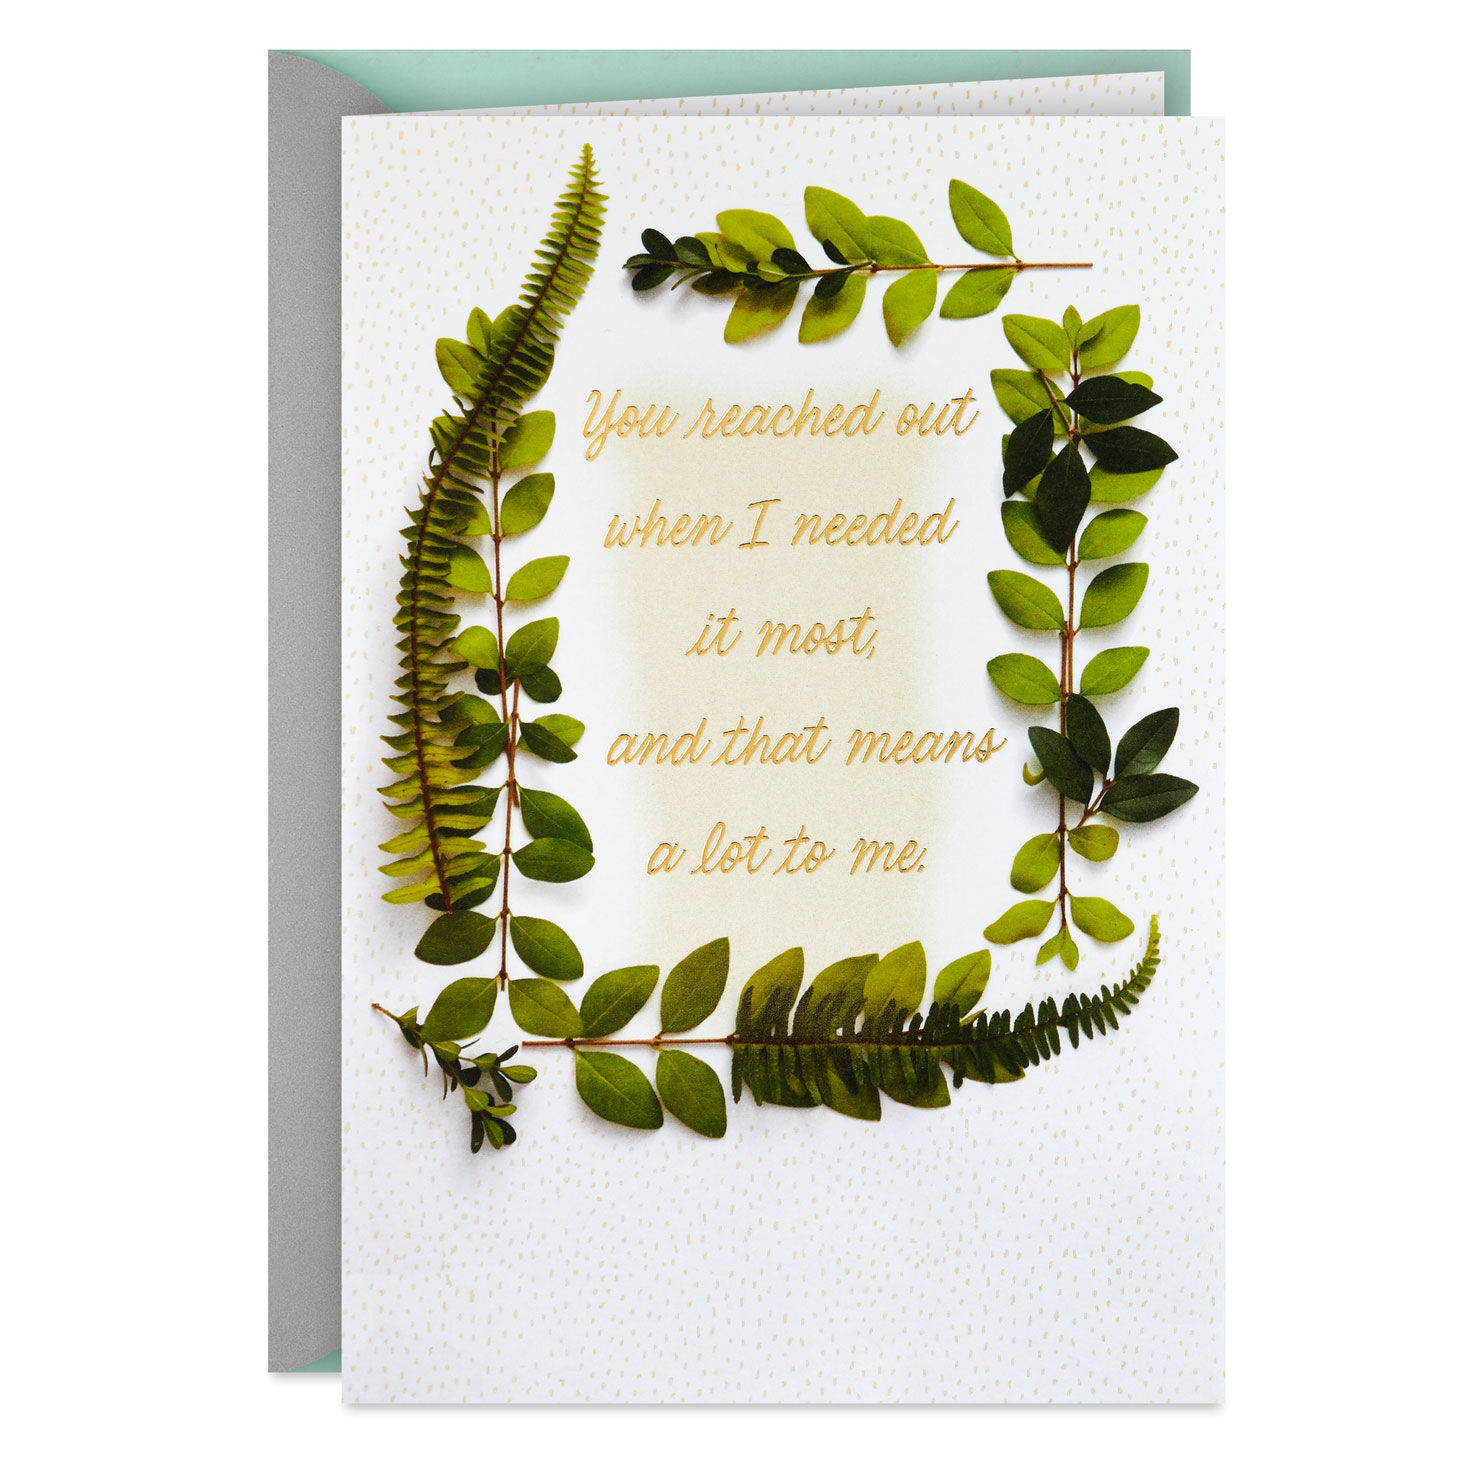 Your Caring Means a Lot Sympathy Thank-You Card for only USD 2.99 | Hallmark